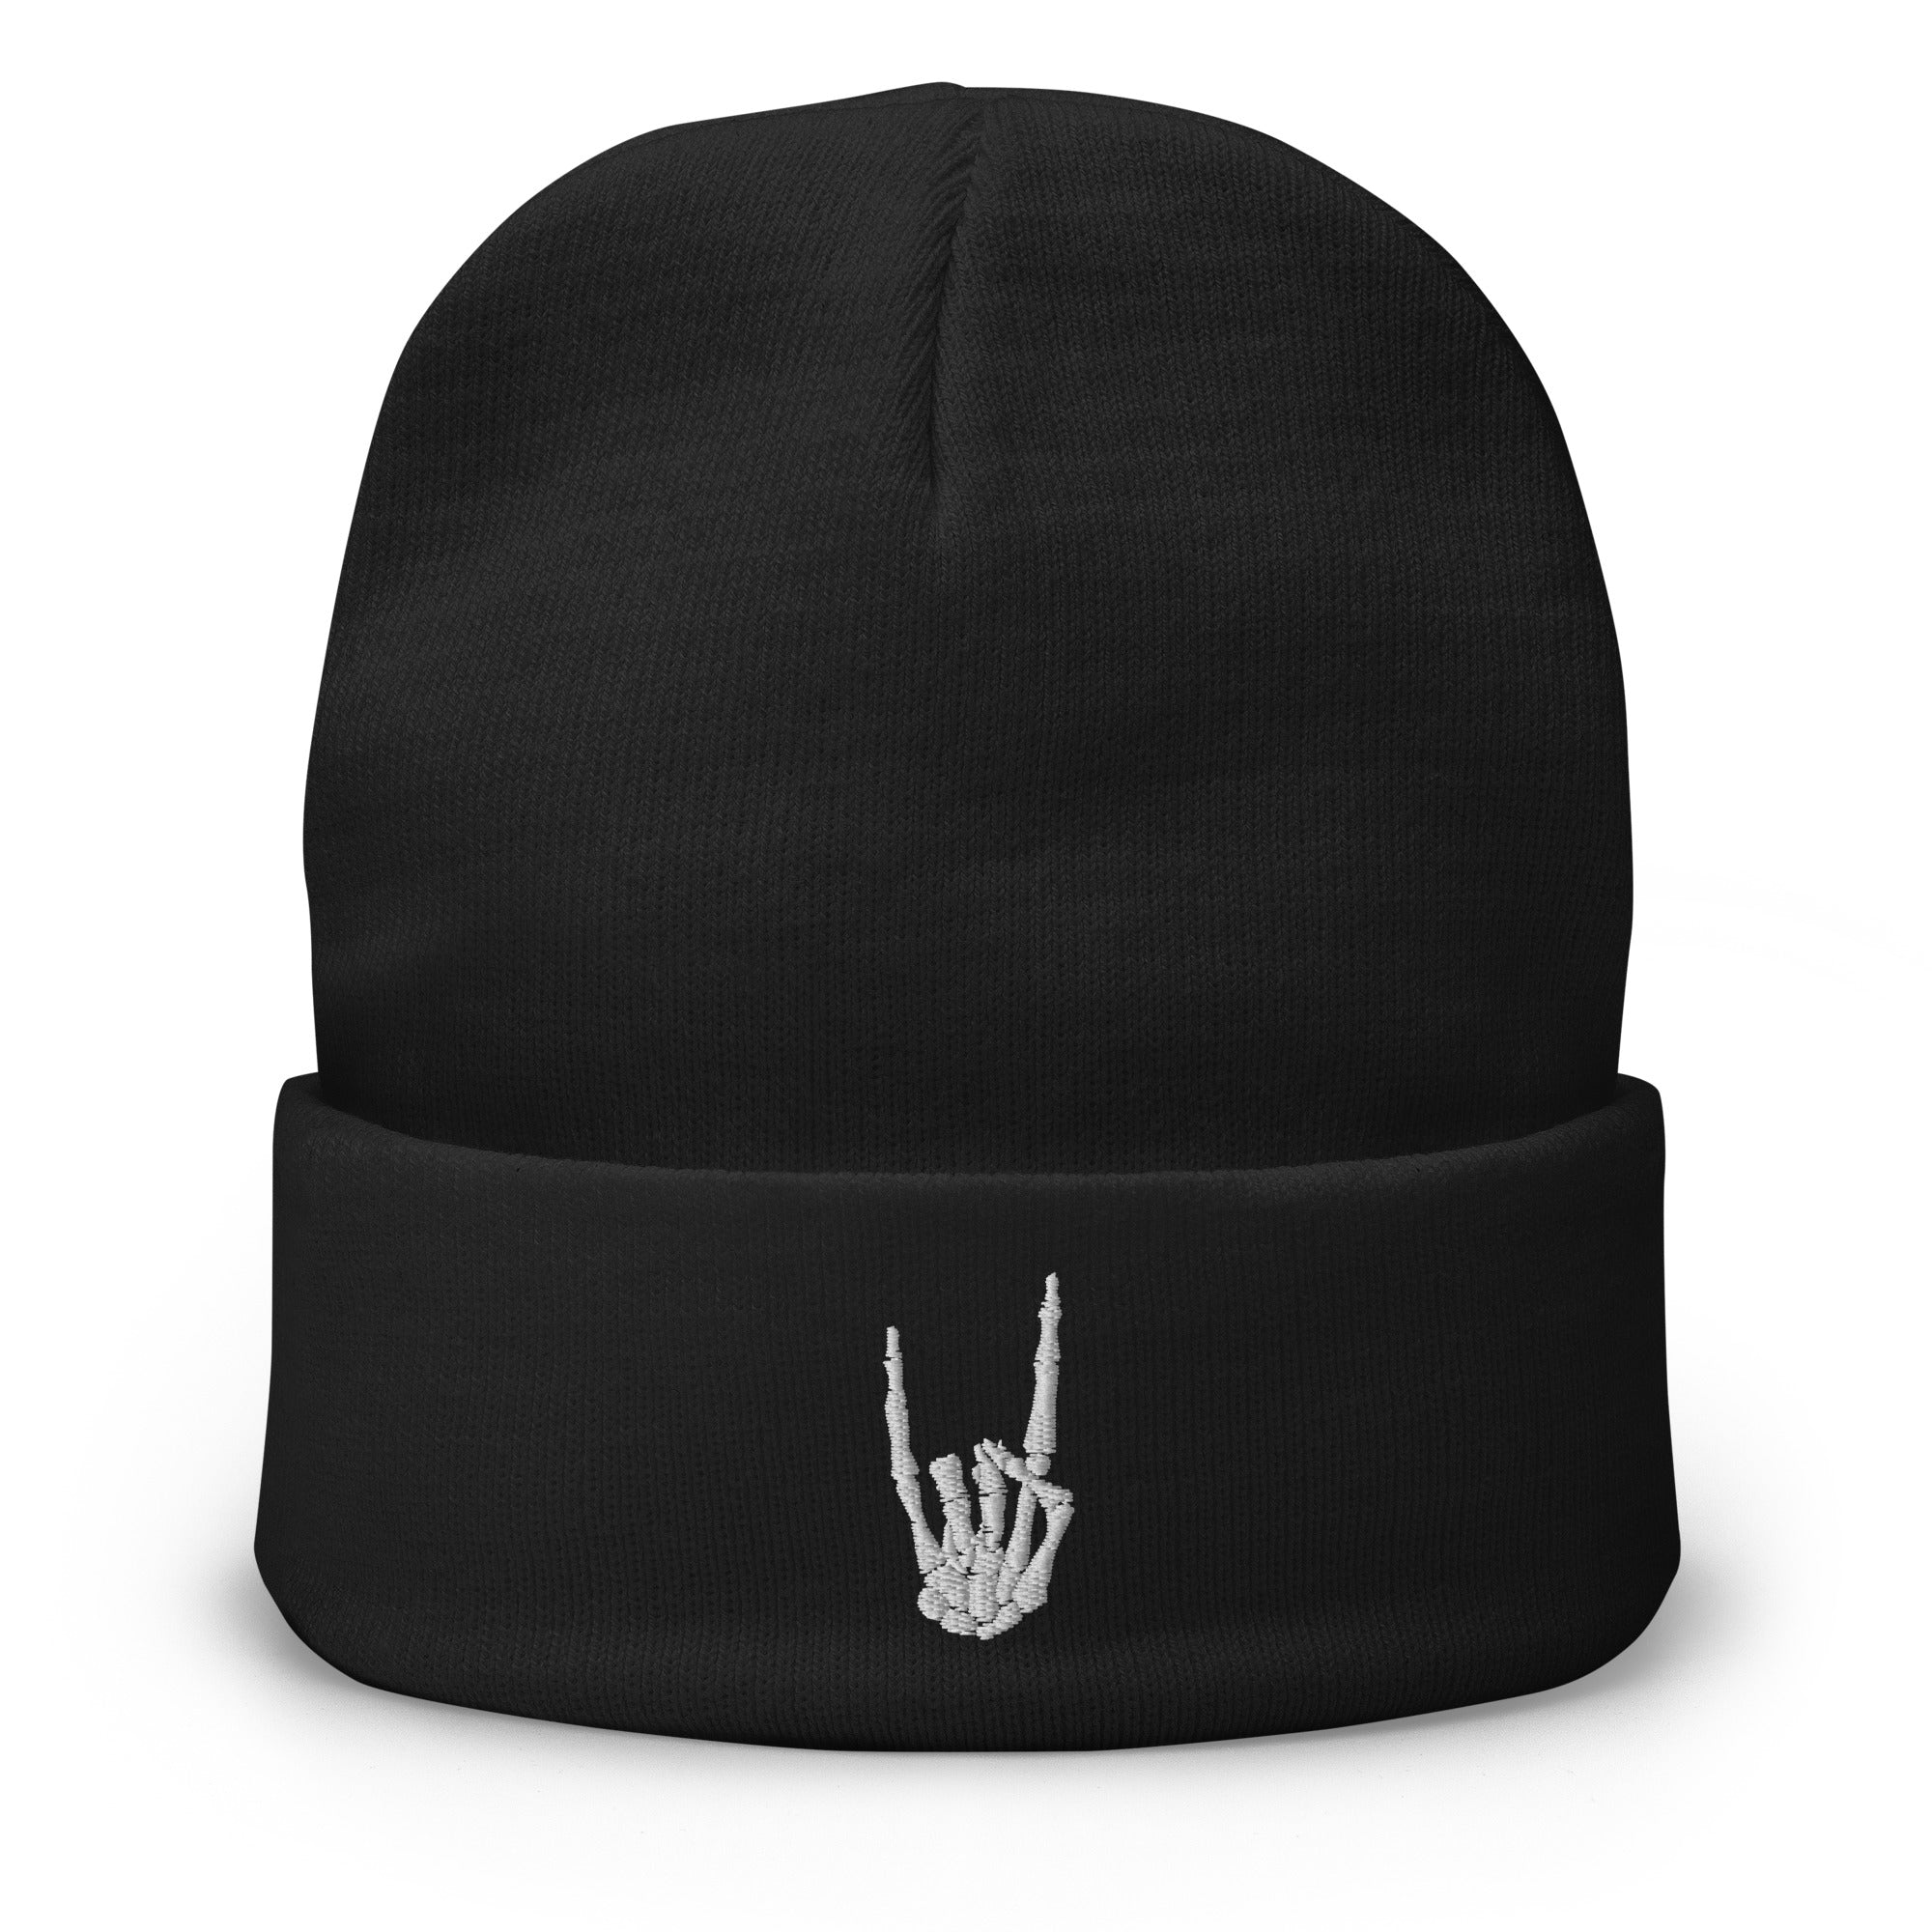 Devil Horns Bone Hand Embroidered Cuff Beanie Heavy Metal Sign Horns Up - Edge of Life Designs